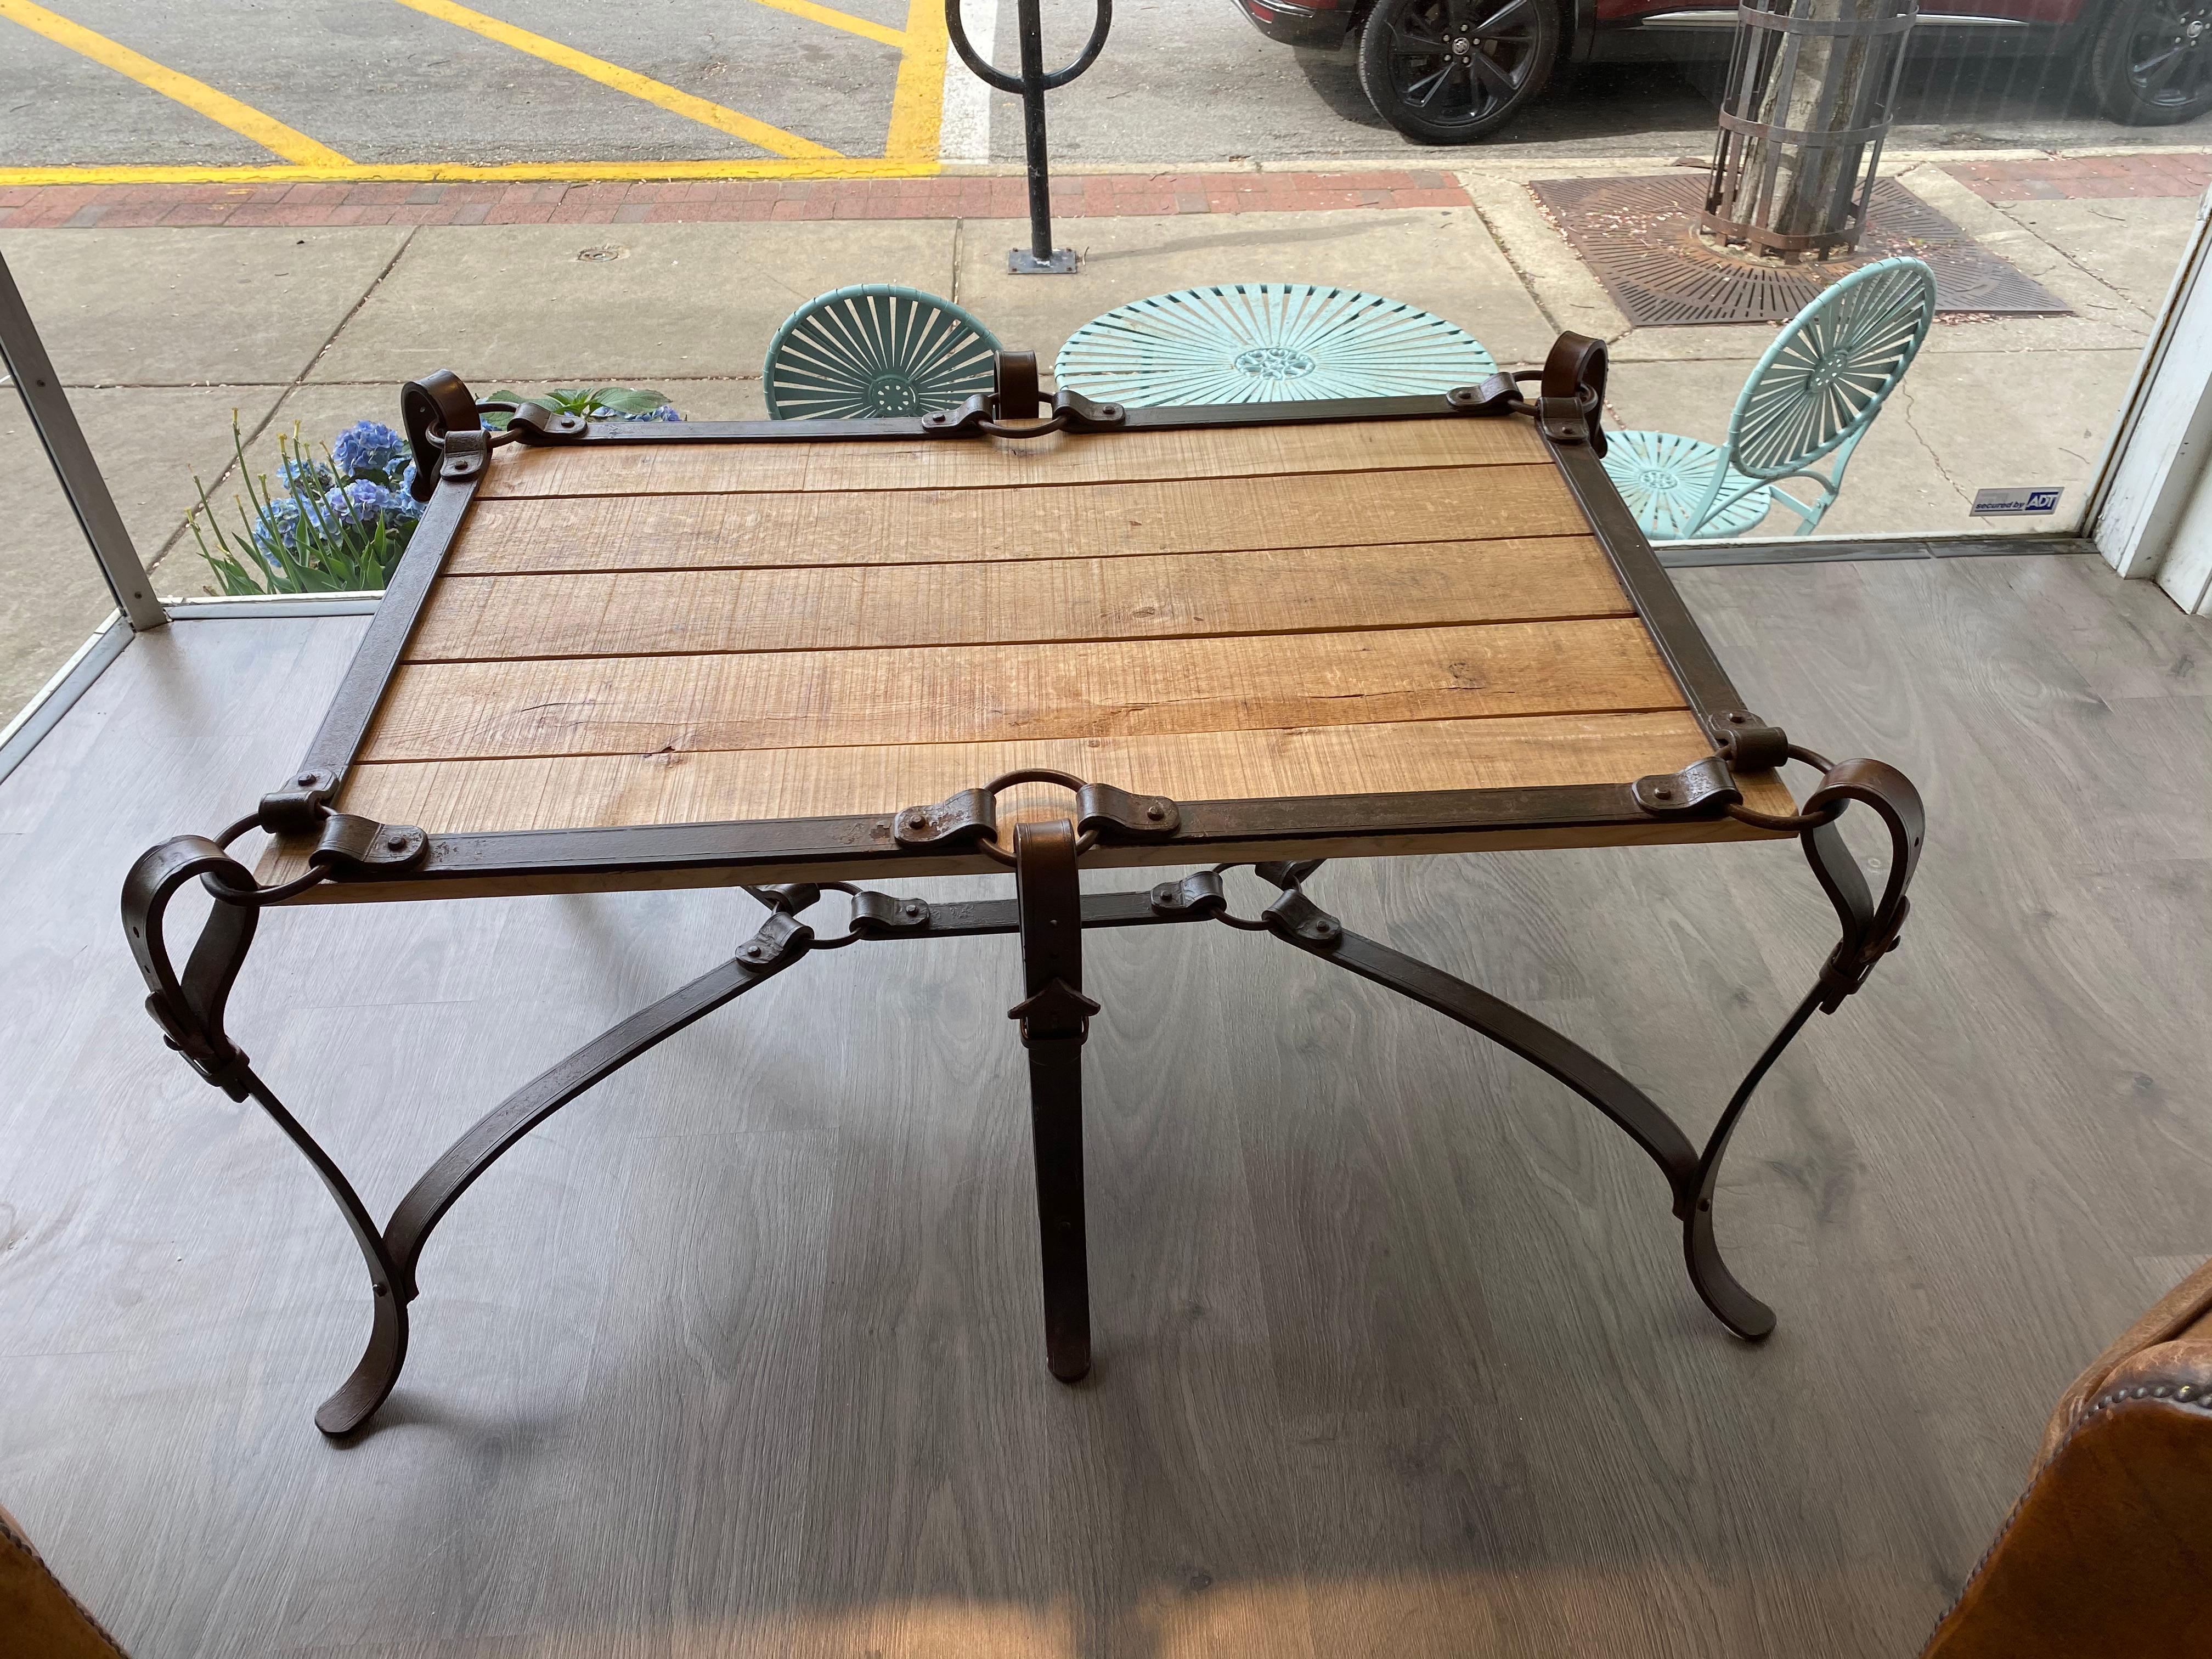 Adirondack Hermes/Adnet Inspired Iron Belt Cocktail Table, Iron Base, Wood Top, Great Style For Sale